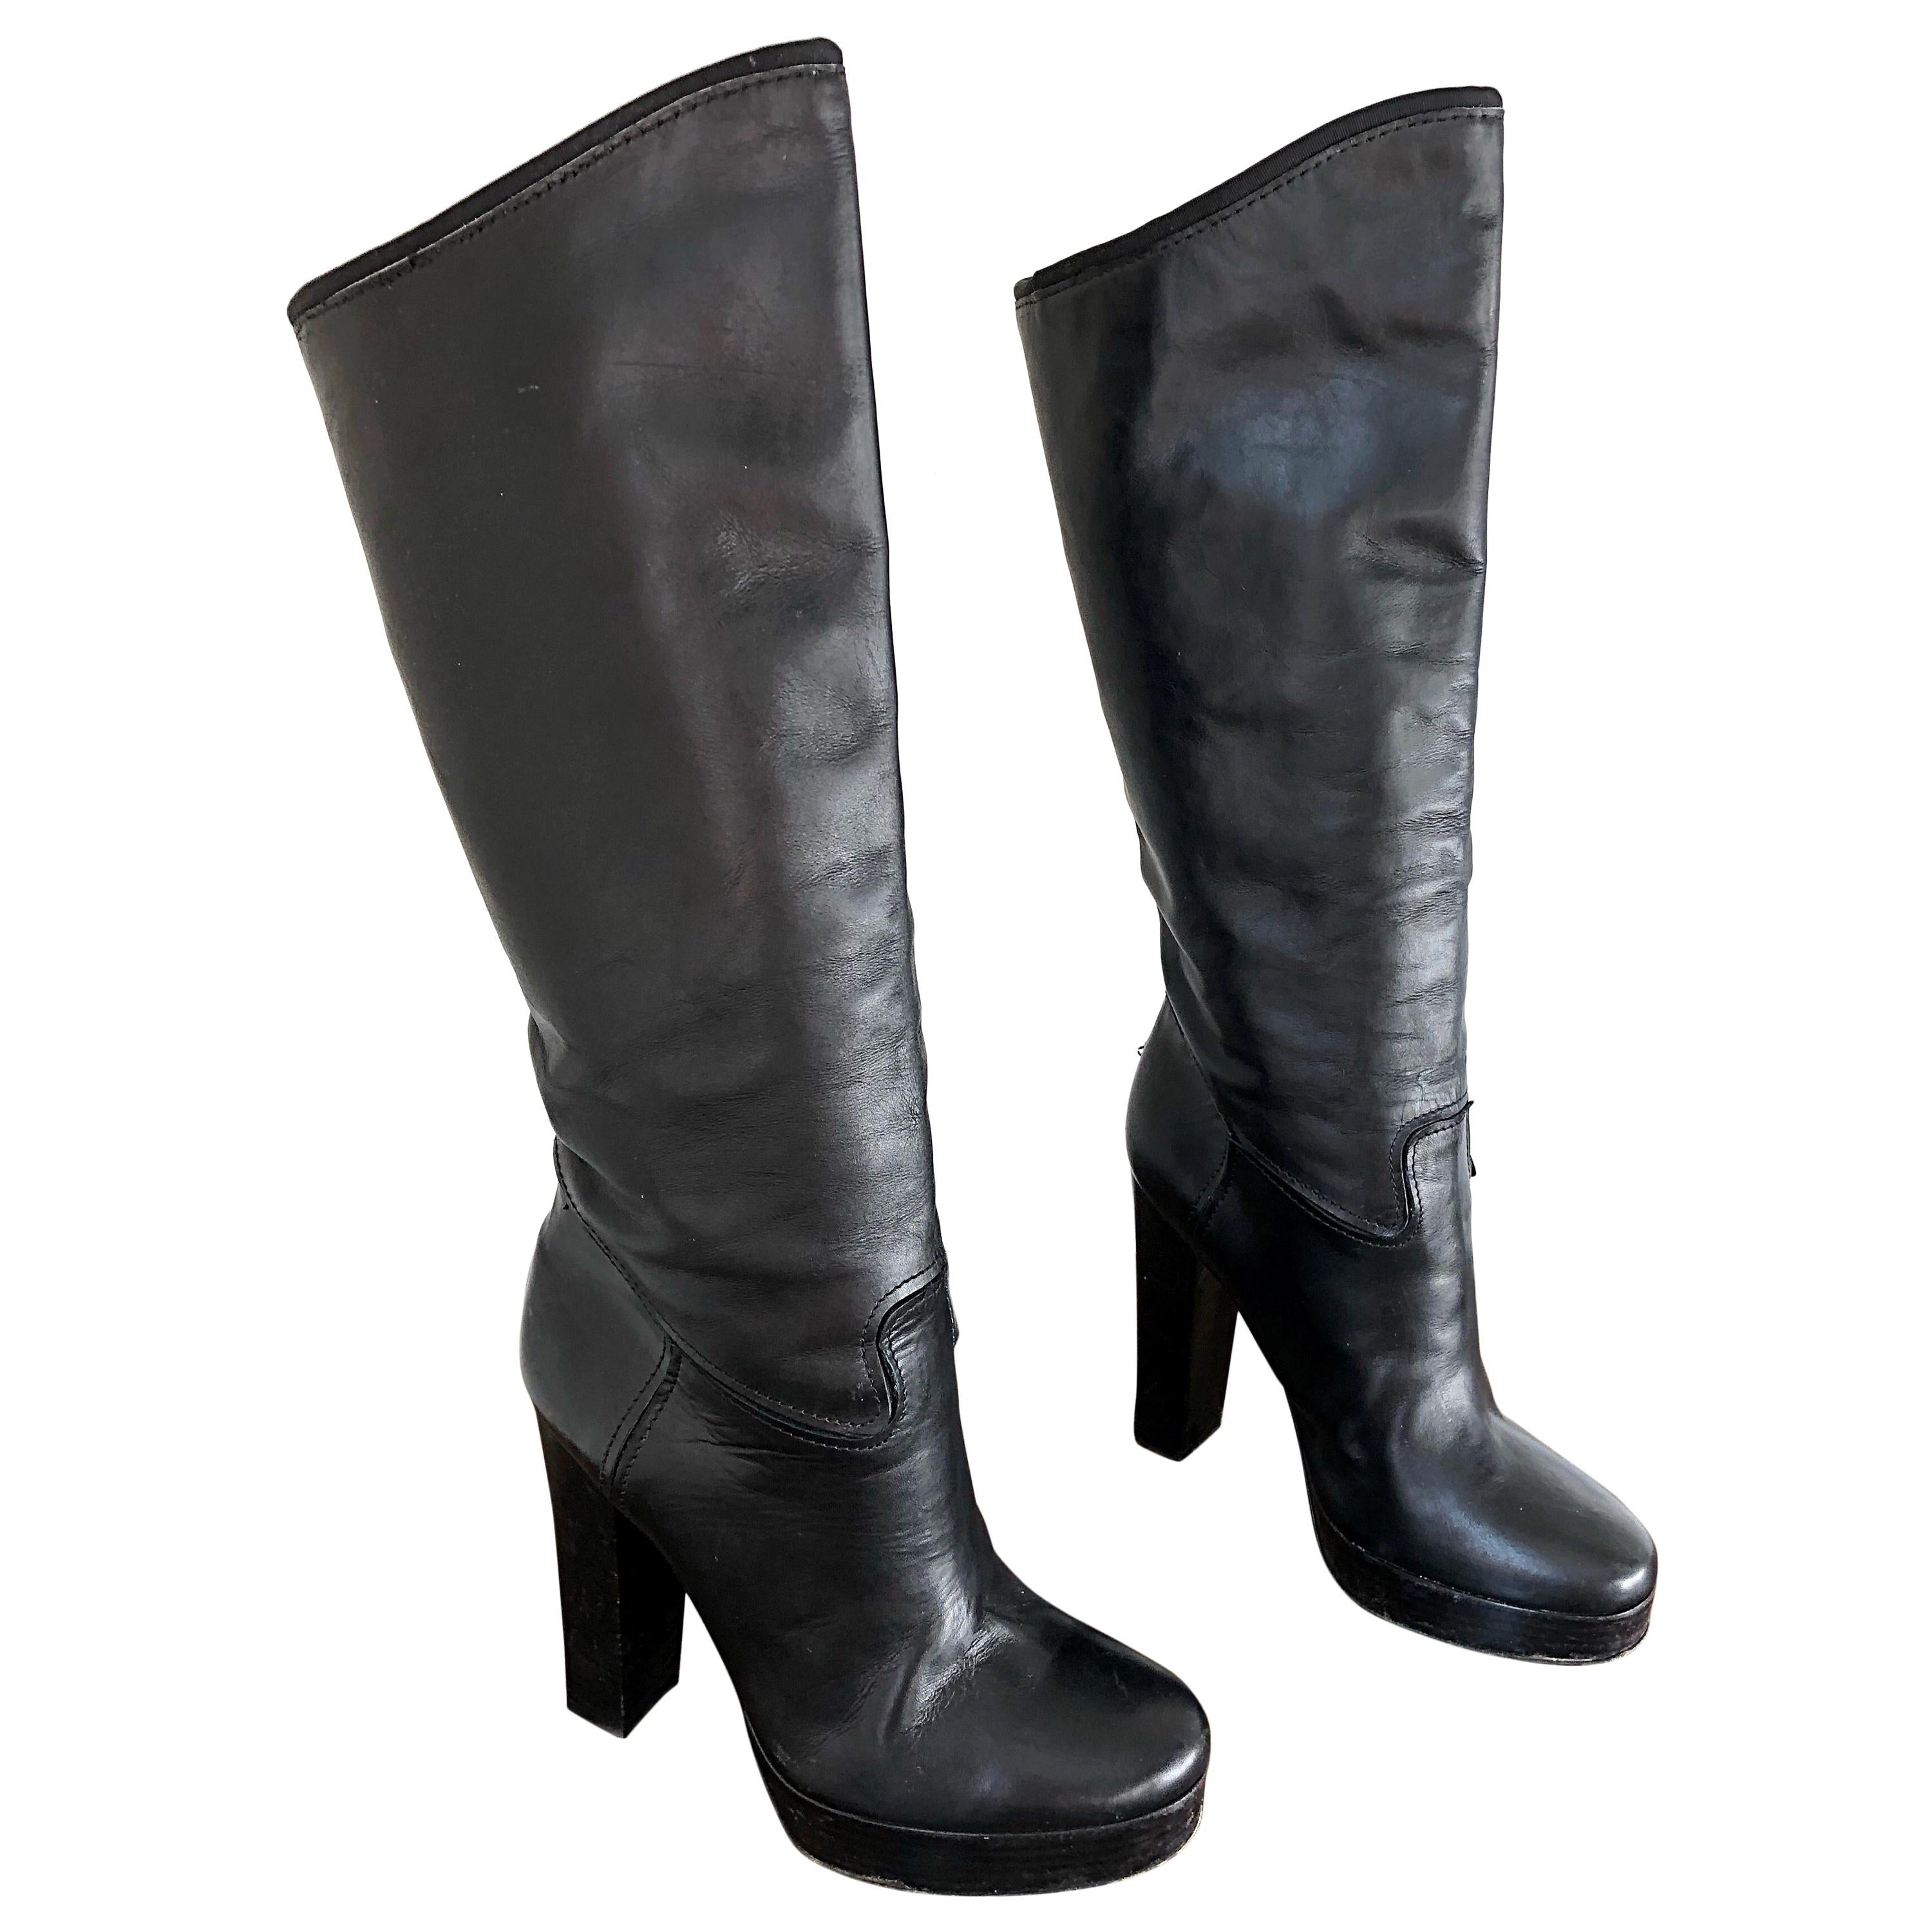 Lanvin Size 35 / 5 Black Leather High Stacked Heel Knee High Boots / Shoes